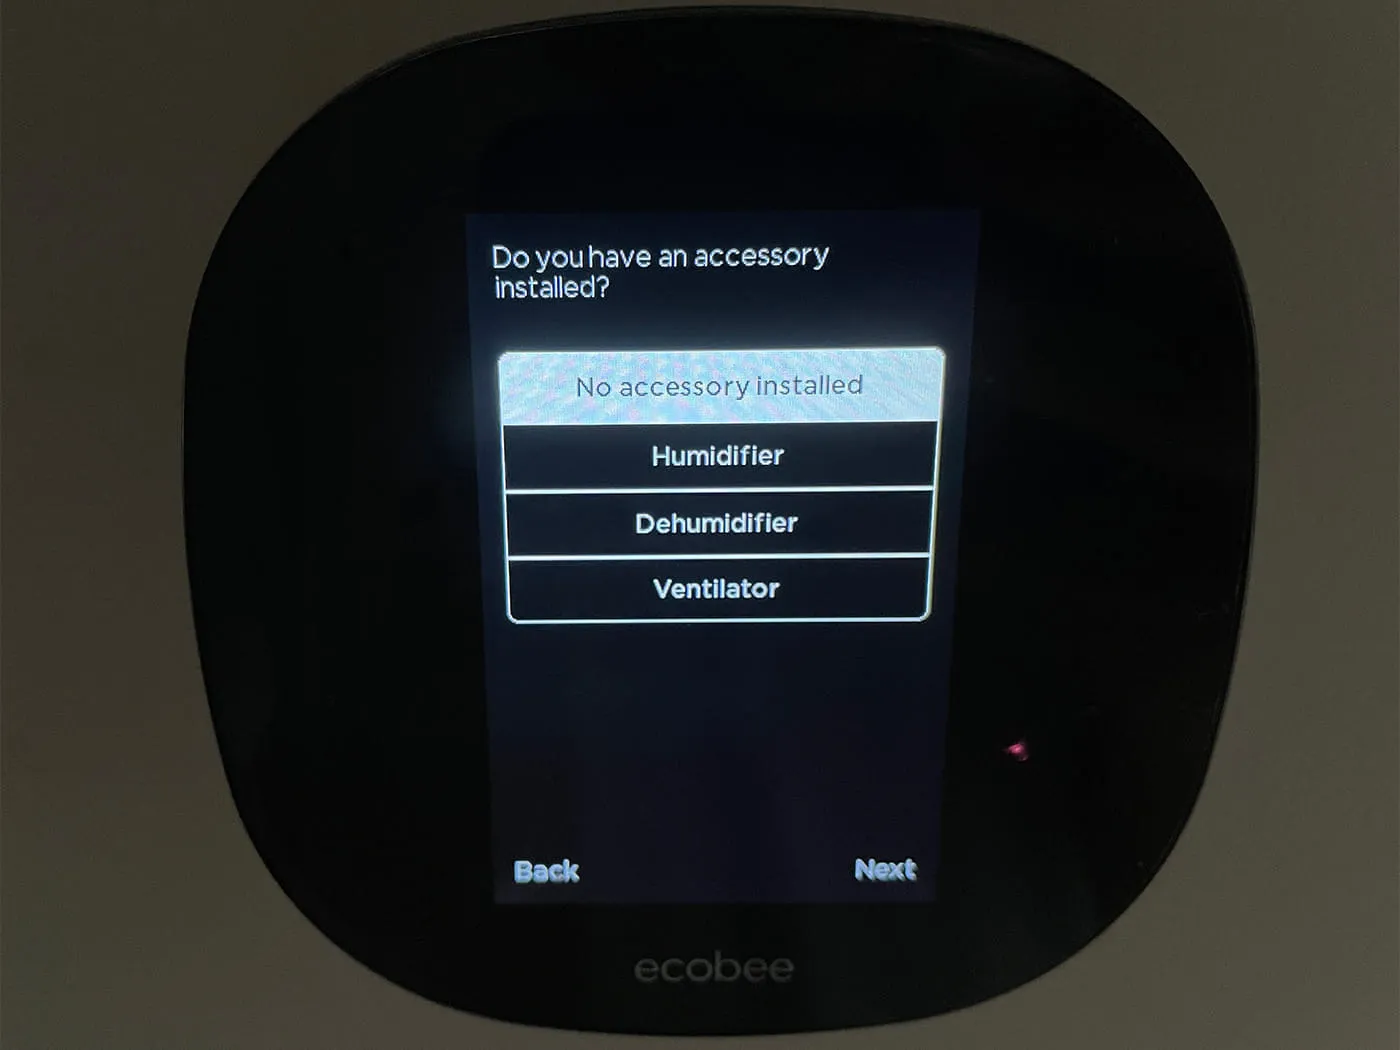 Ecobee thermostat Accessory Options screen